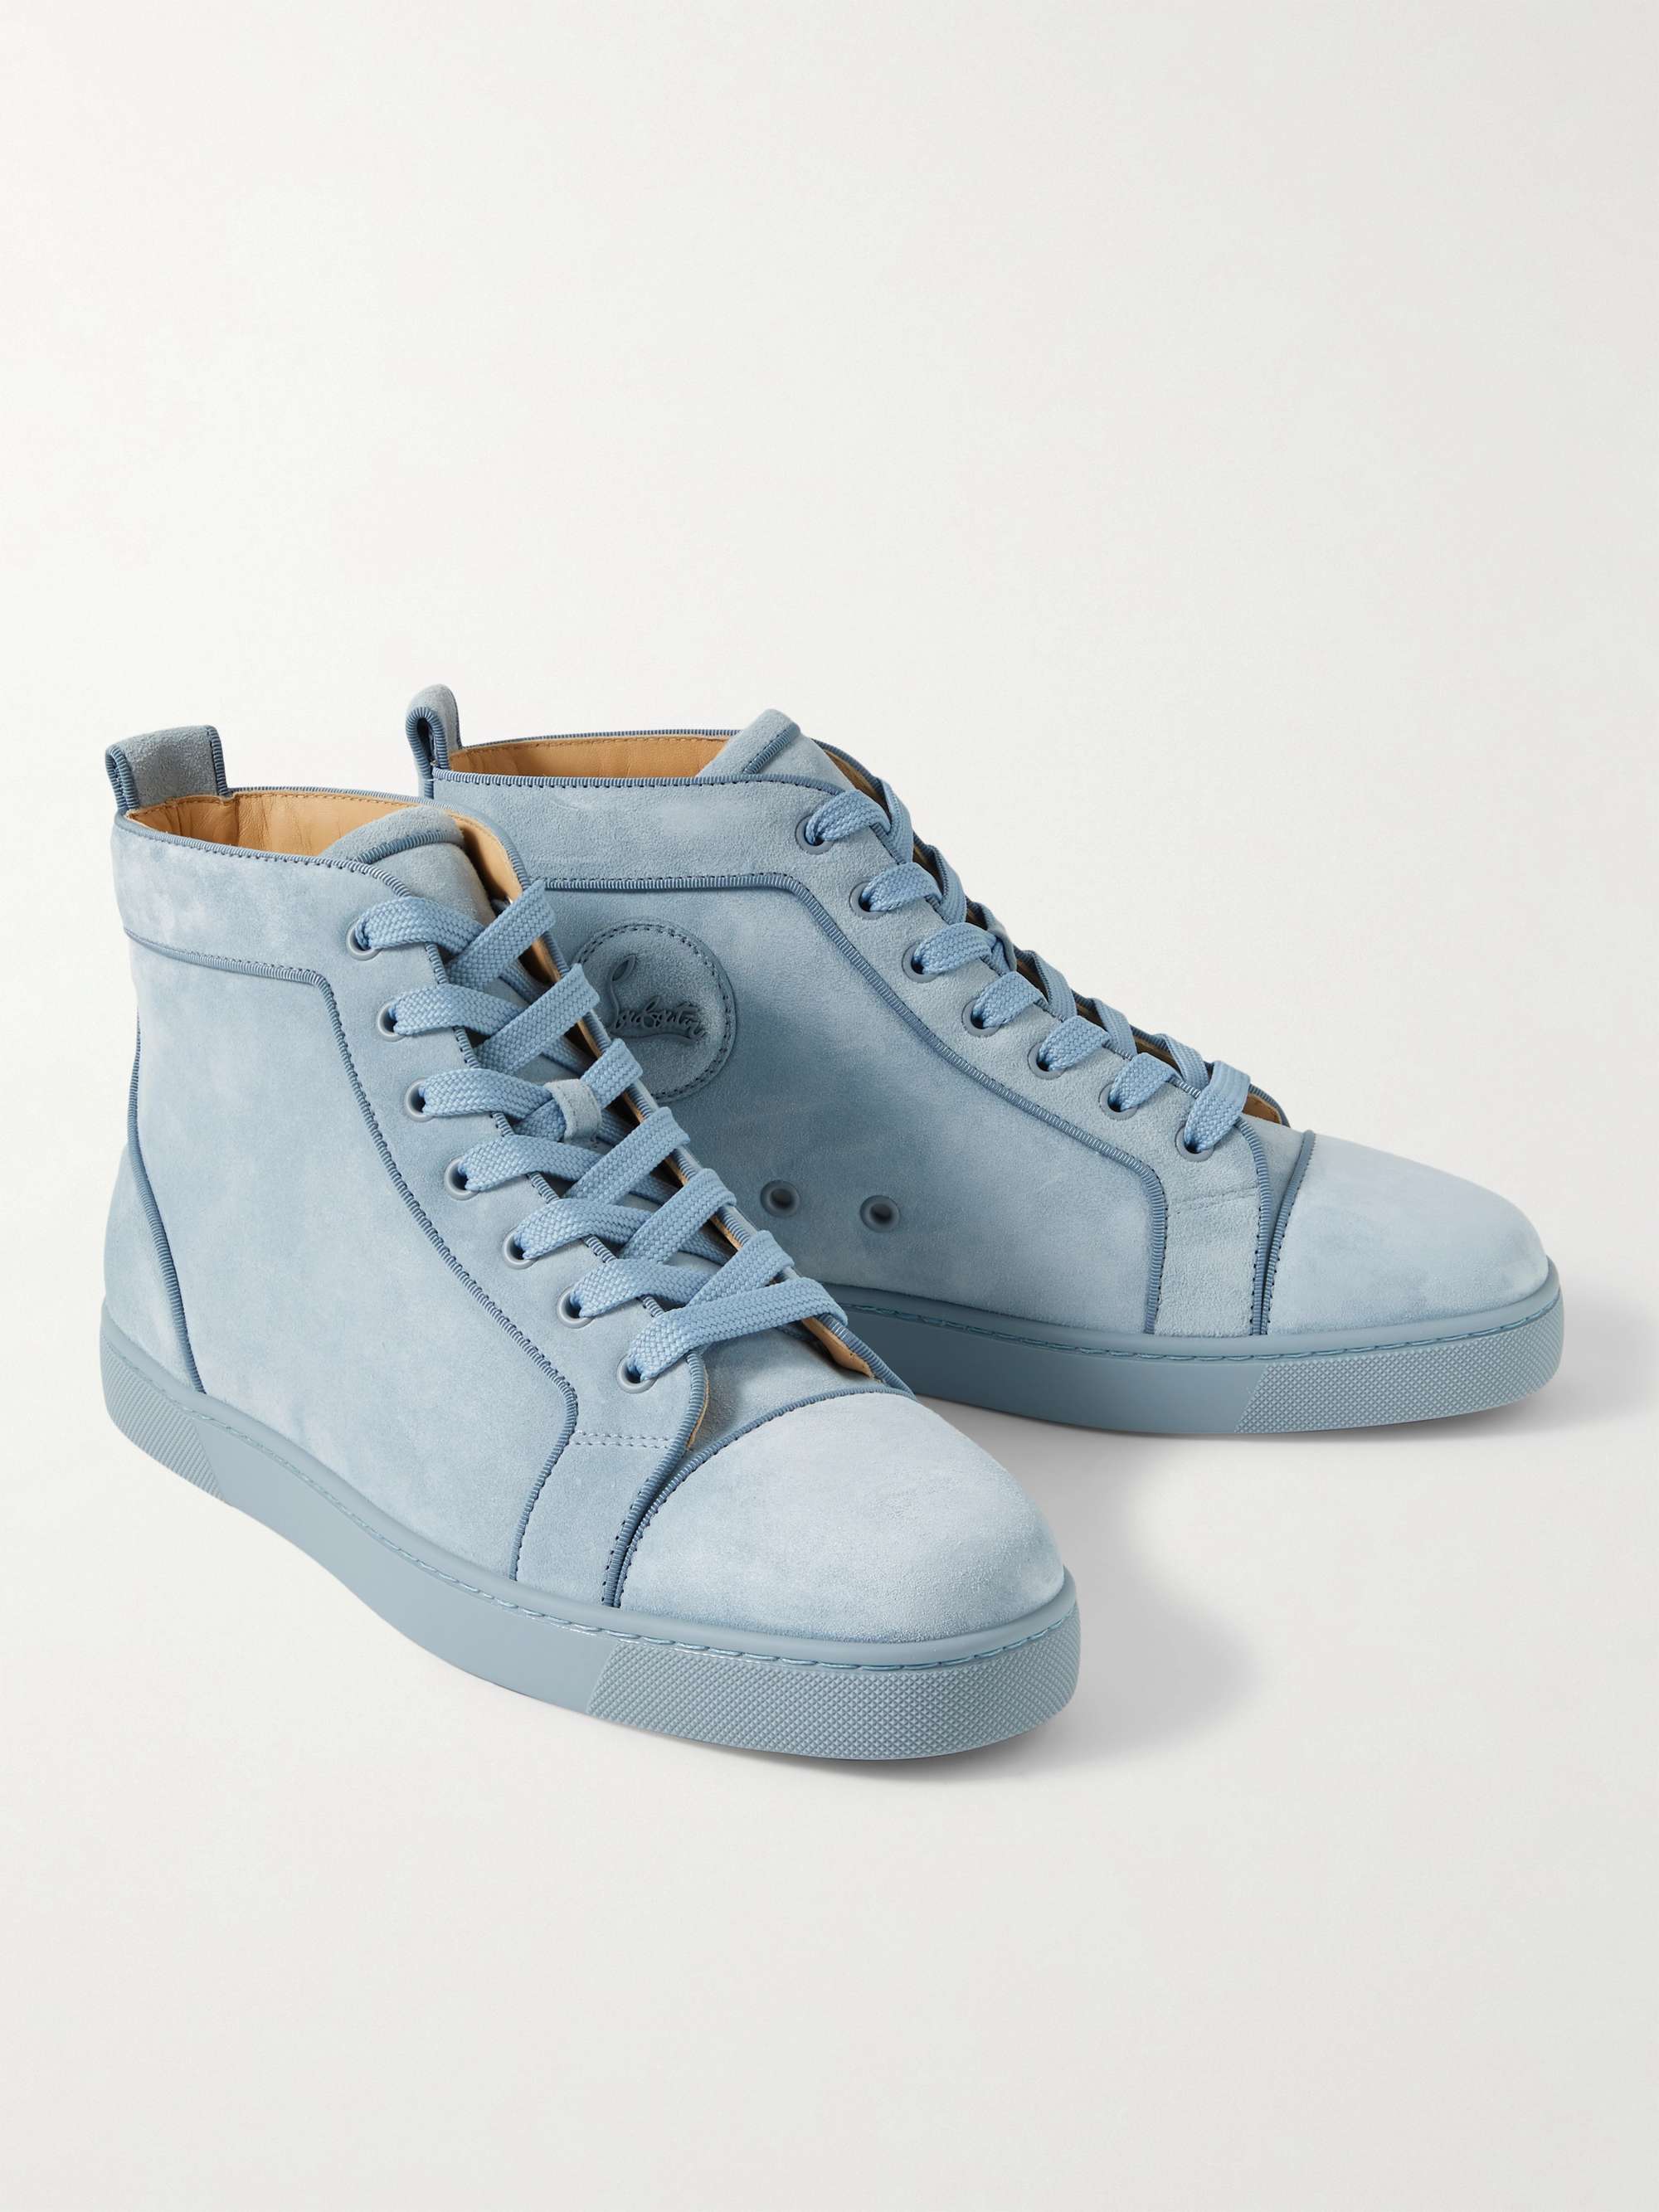 Christian Louboutin Louis Orlato Grosgrain-trimmed Suede High-top Sneakers in Blue for Men Mens Shoes Trainers High-top trainers 